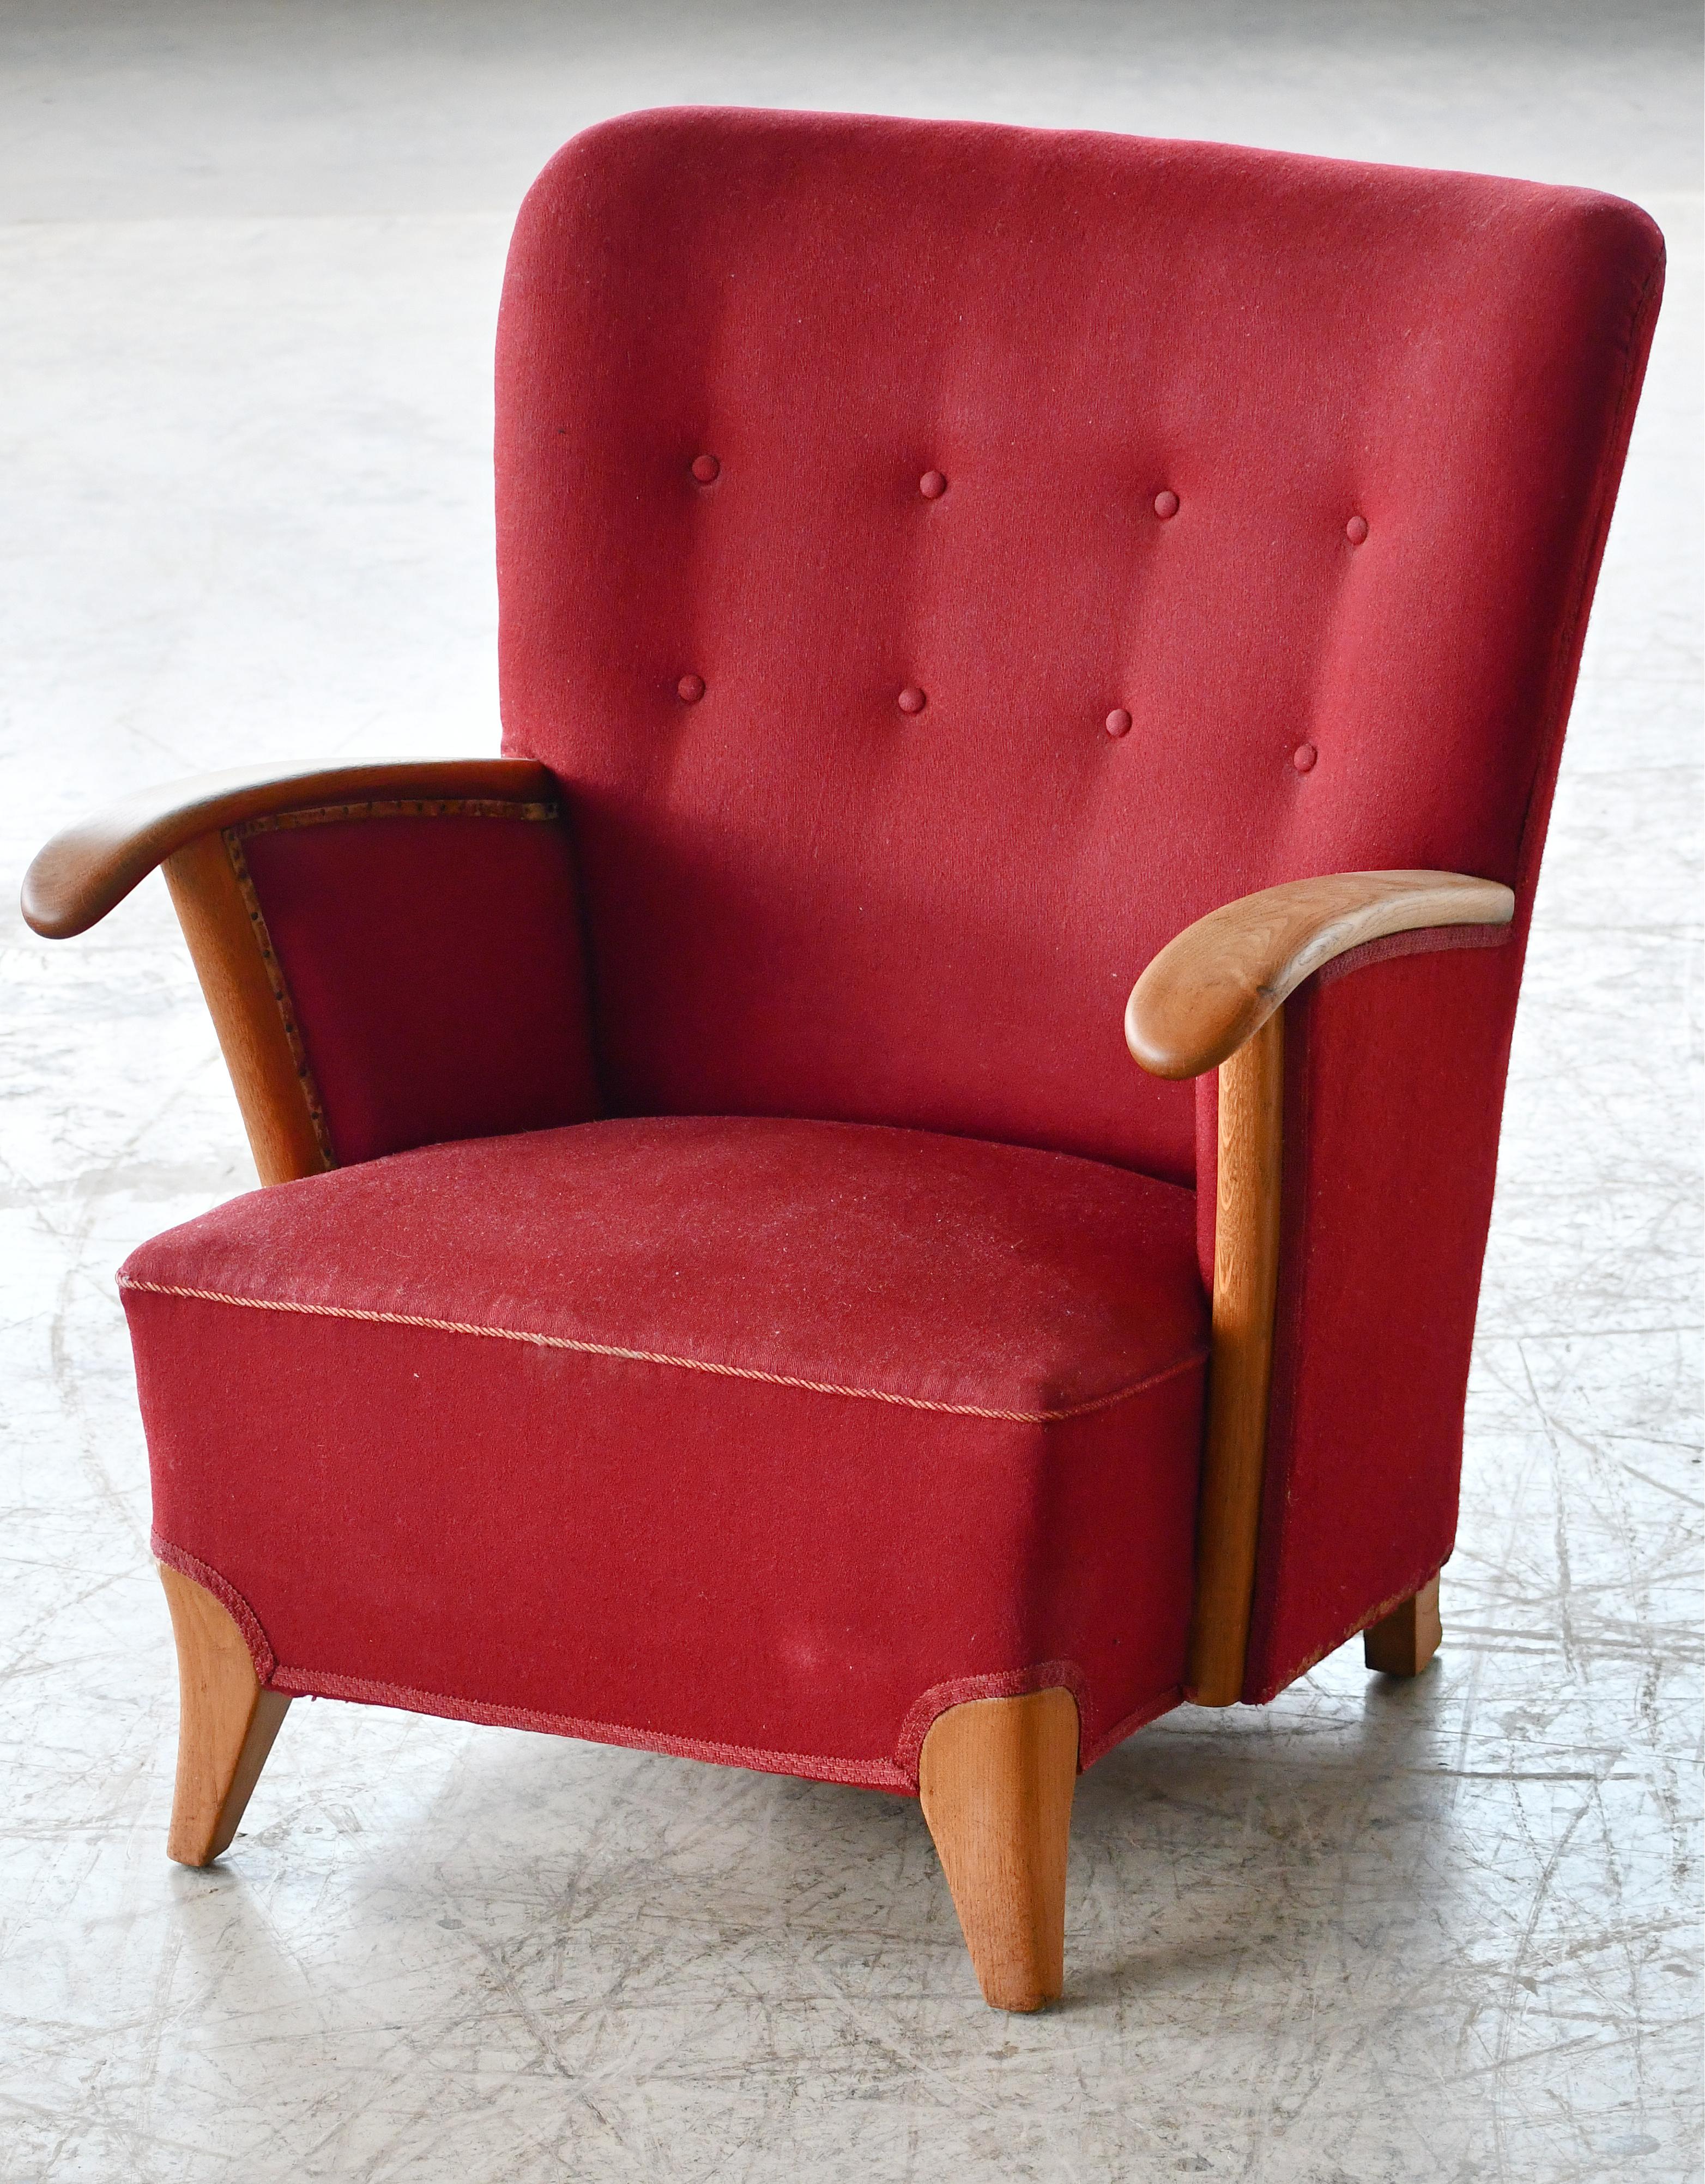 Elegant and unusual lounge chair from the 1940's  in the style of Swedish Designer, Carl Malmsten. We have never seen any other examples of this chair and it may well be a one-of-a- kind chair by a Danish Cabinetmaker. Armrests and base made form